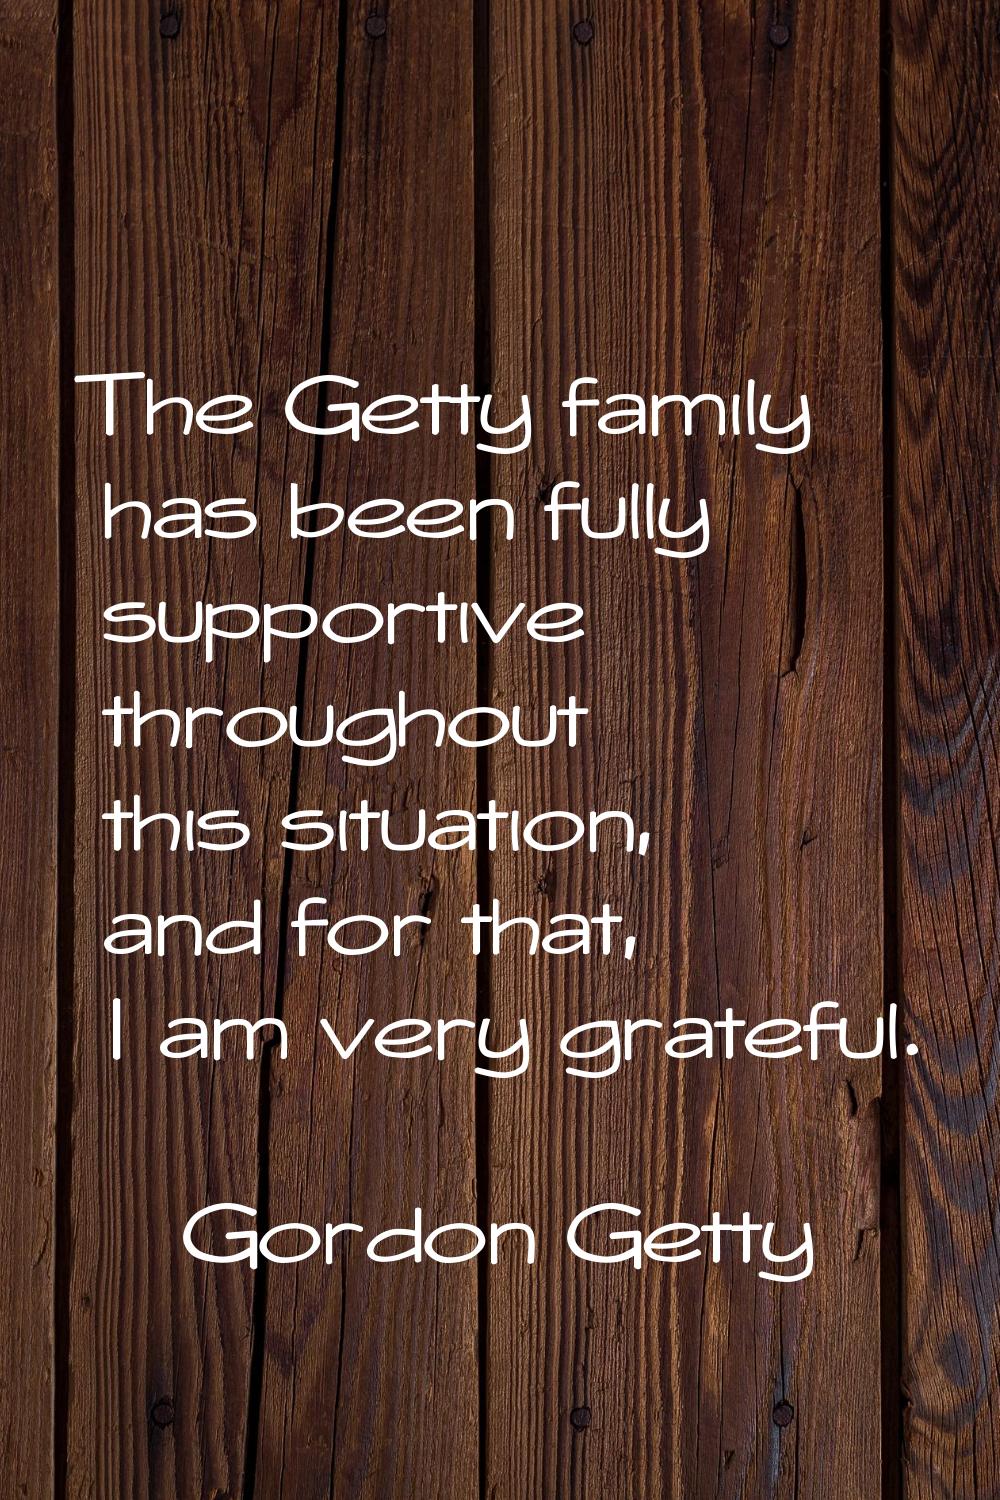 The Getty family has been fully supportive throughout this situation, and for that, I am very grate